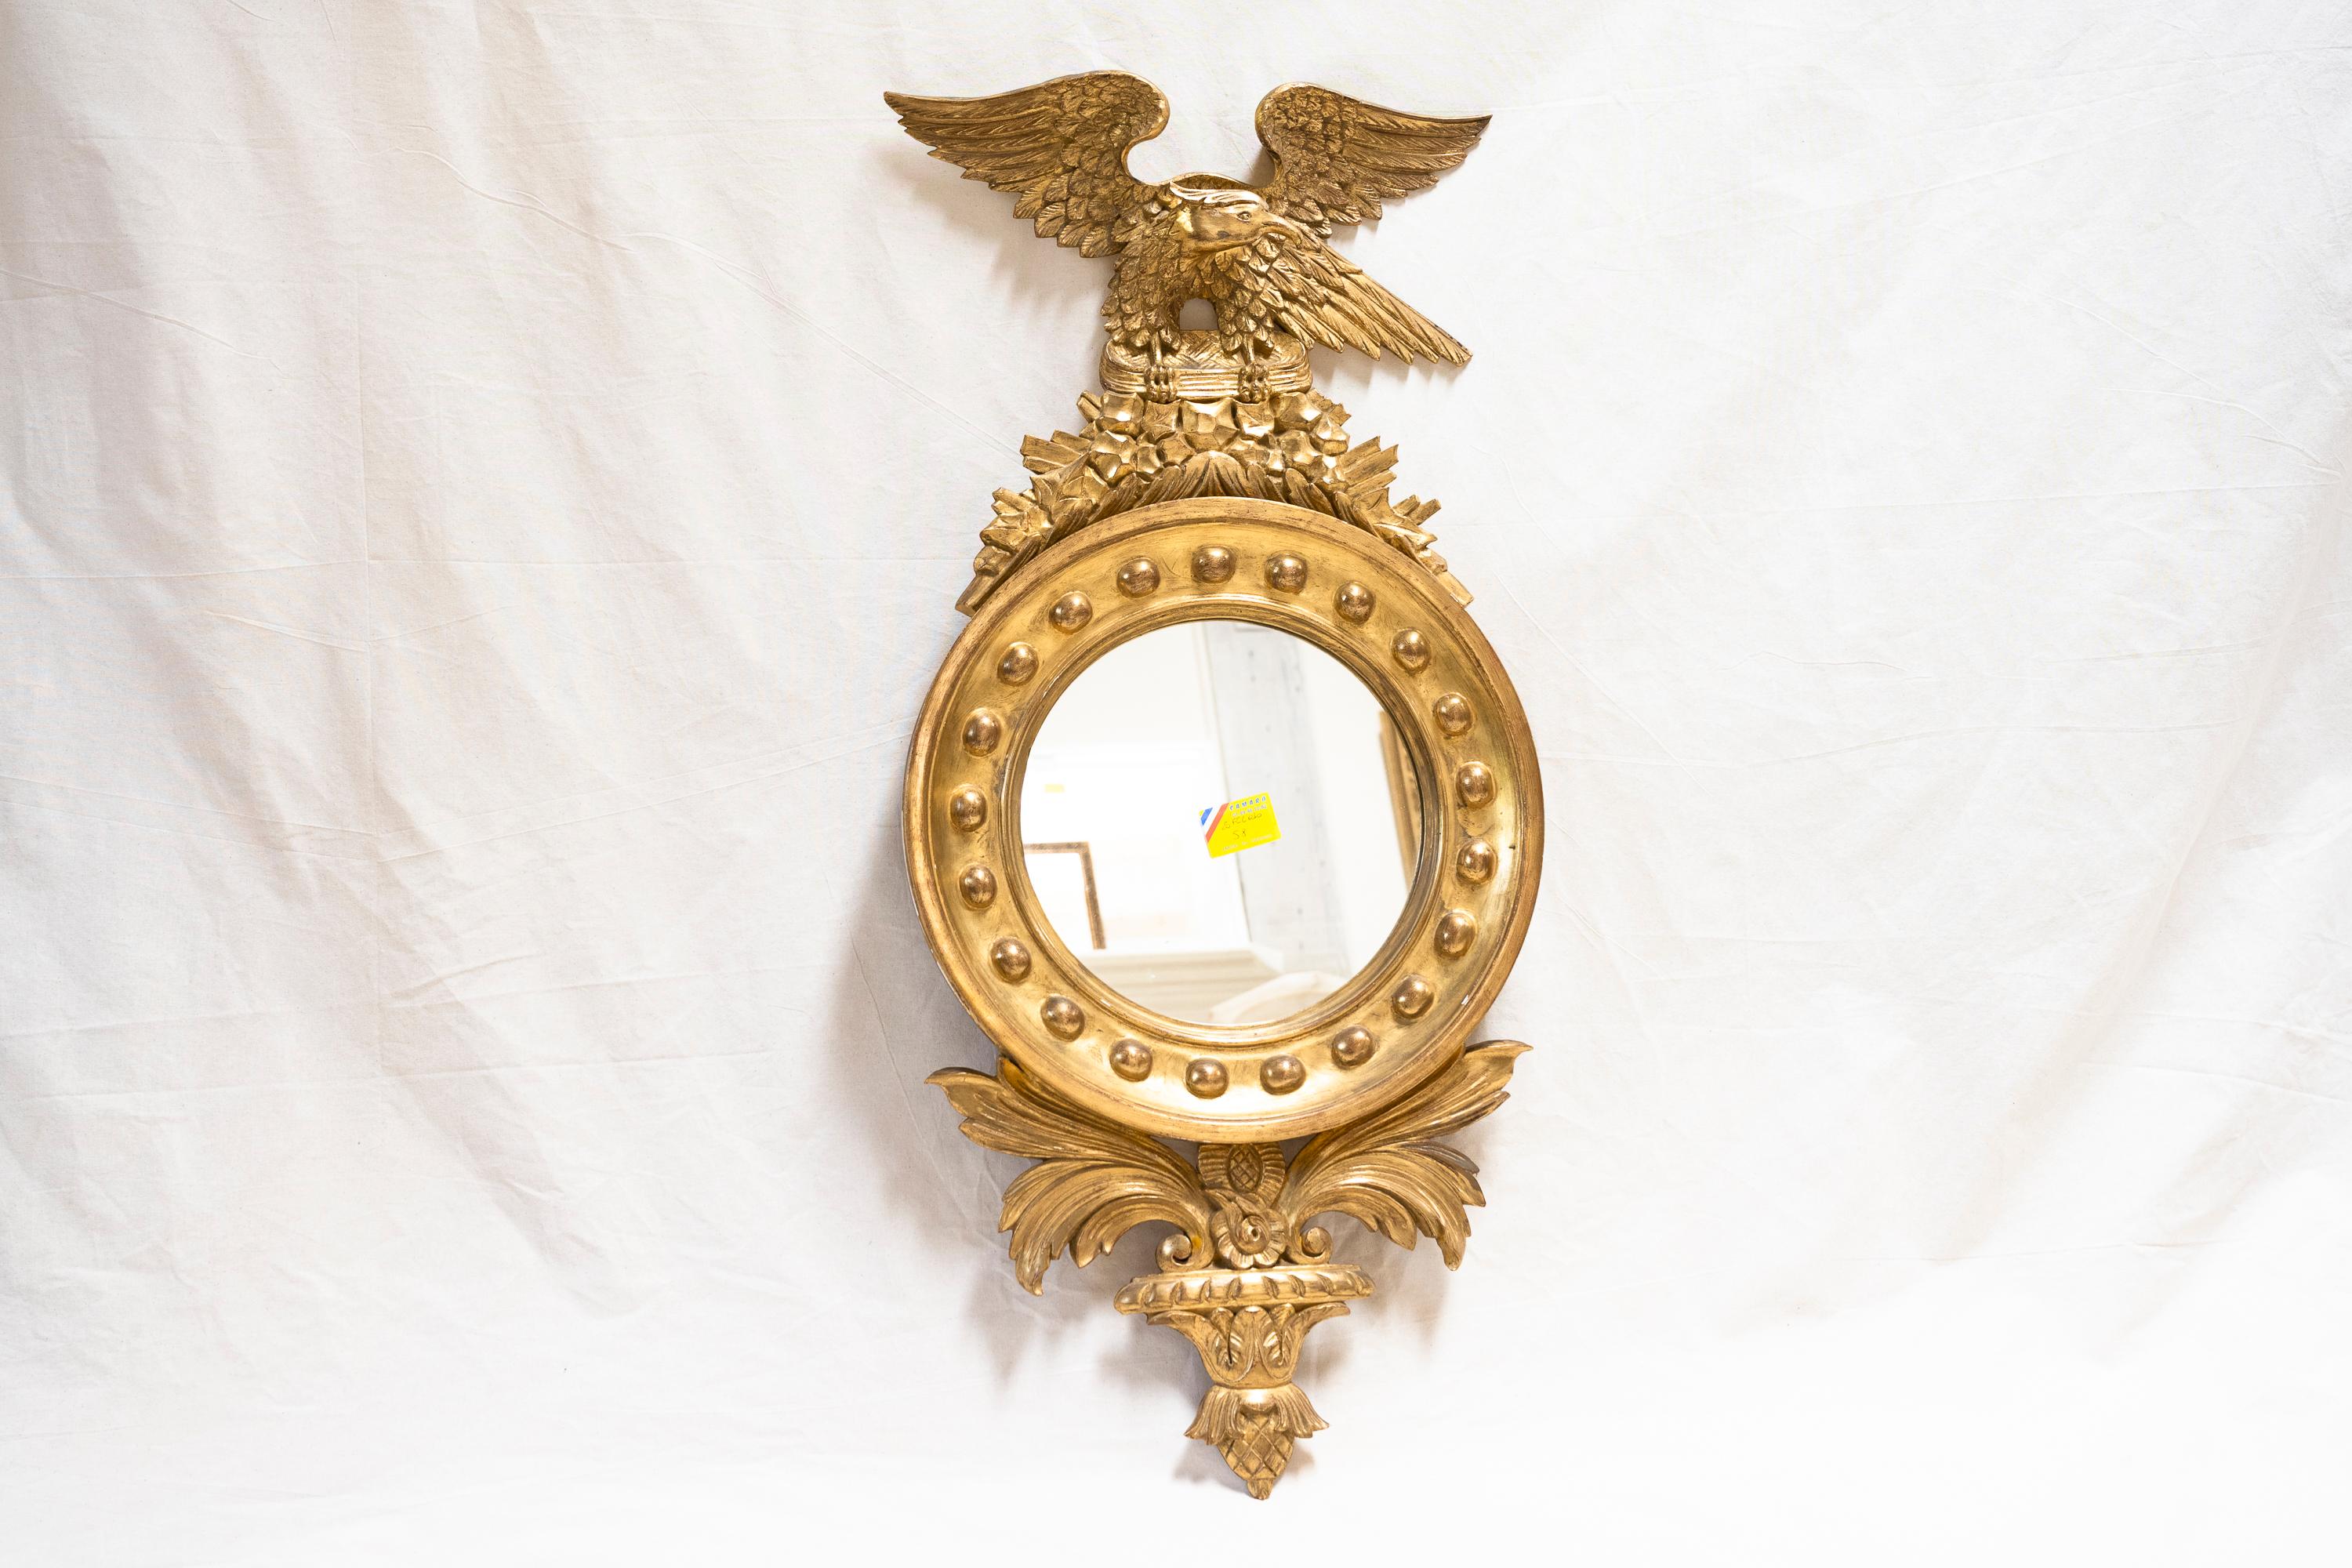 Rare French Second Empire period carved gilt wood round mirror, decorated with ball molded frame, with imperial eagle atop with wings spread, acanthus leaves below. 

Provenance: Summer estate in Saint-Cyprien, France.